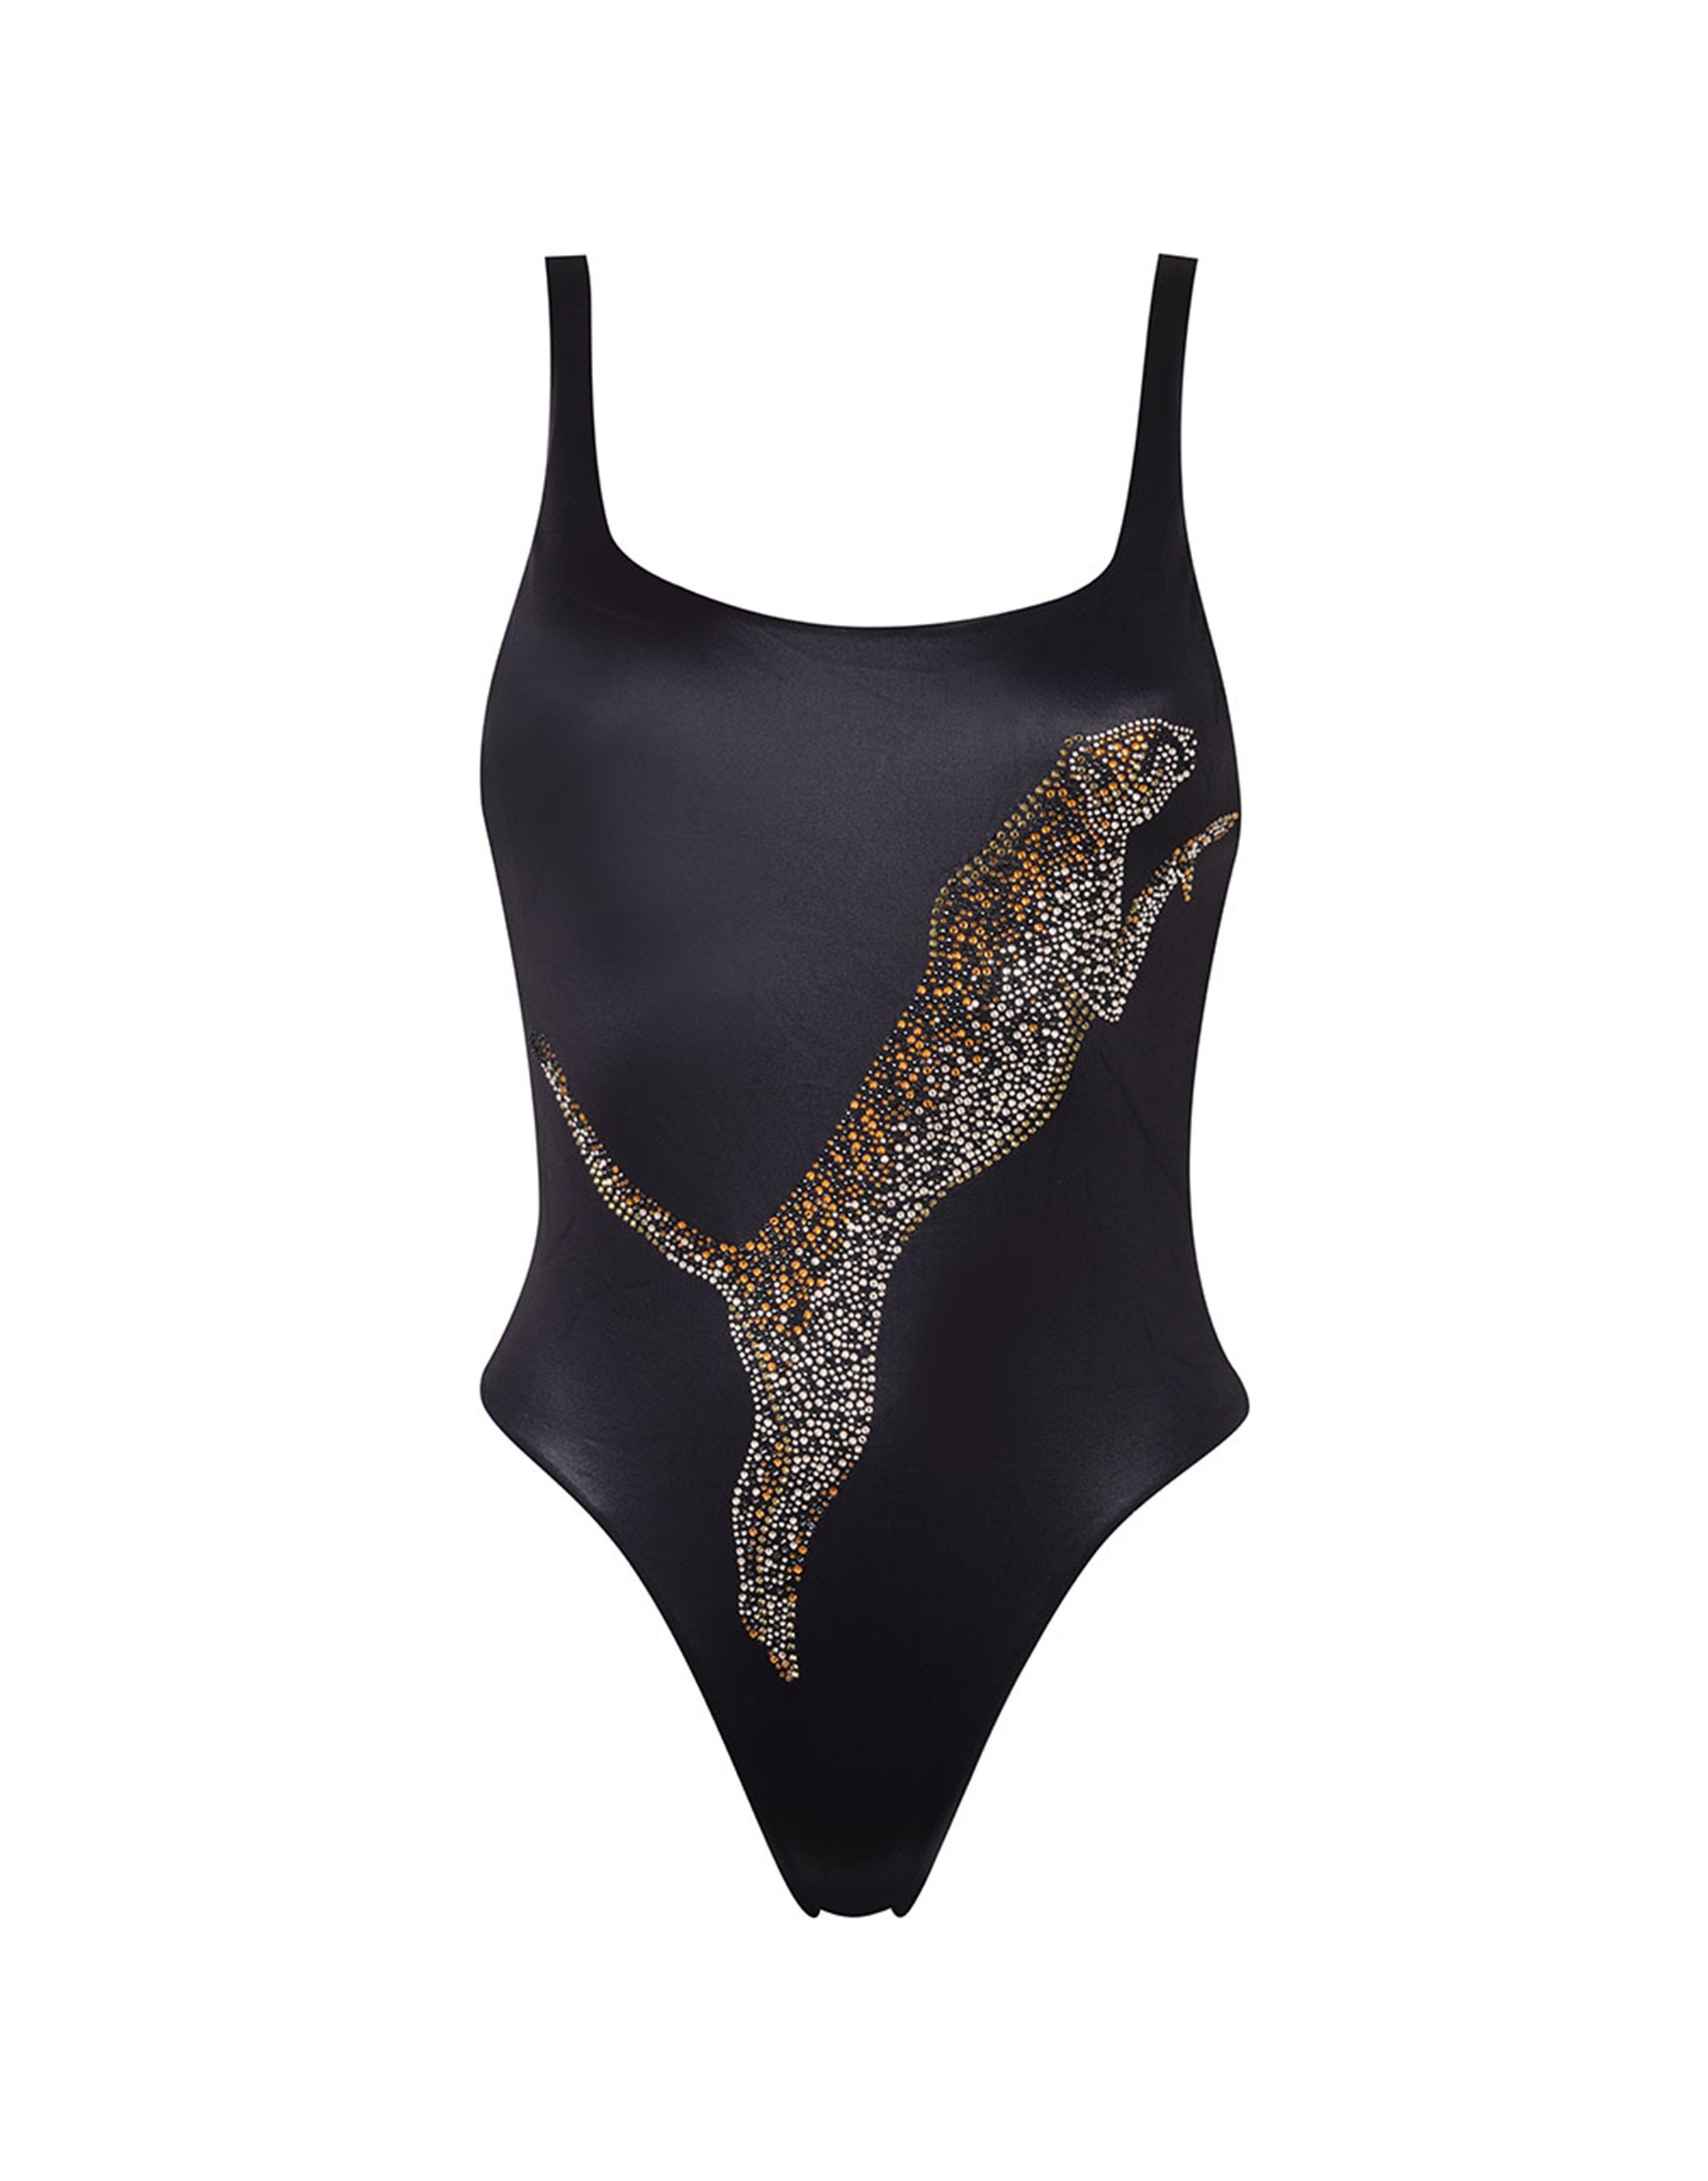 Indiana Swimsuit in Black | Agent Provocateur Outlet